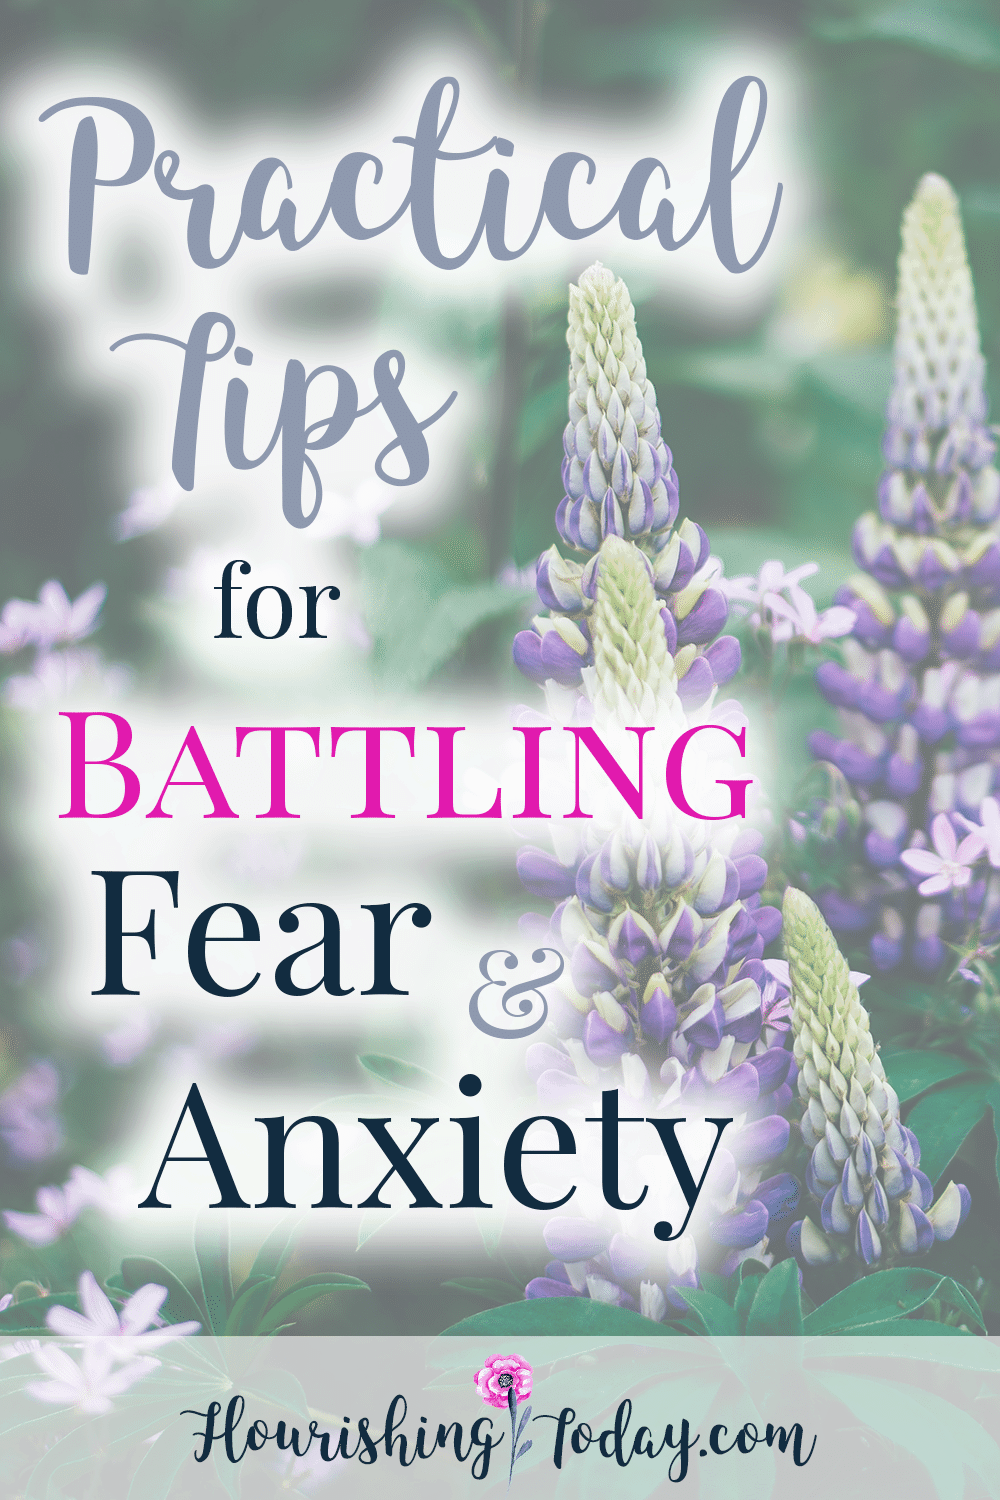 Are you consumed with fear and anxiety? Do you want to battle it but don't know how? Here are some practical tips for battling fear and anxiety.